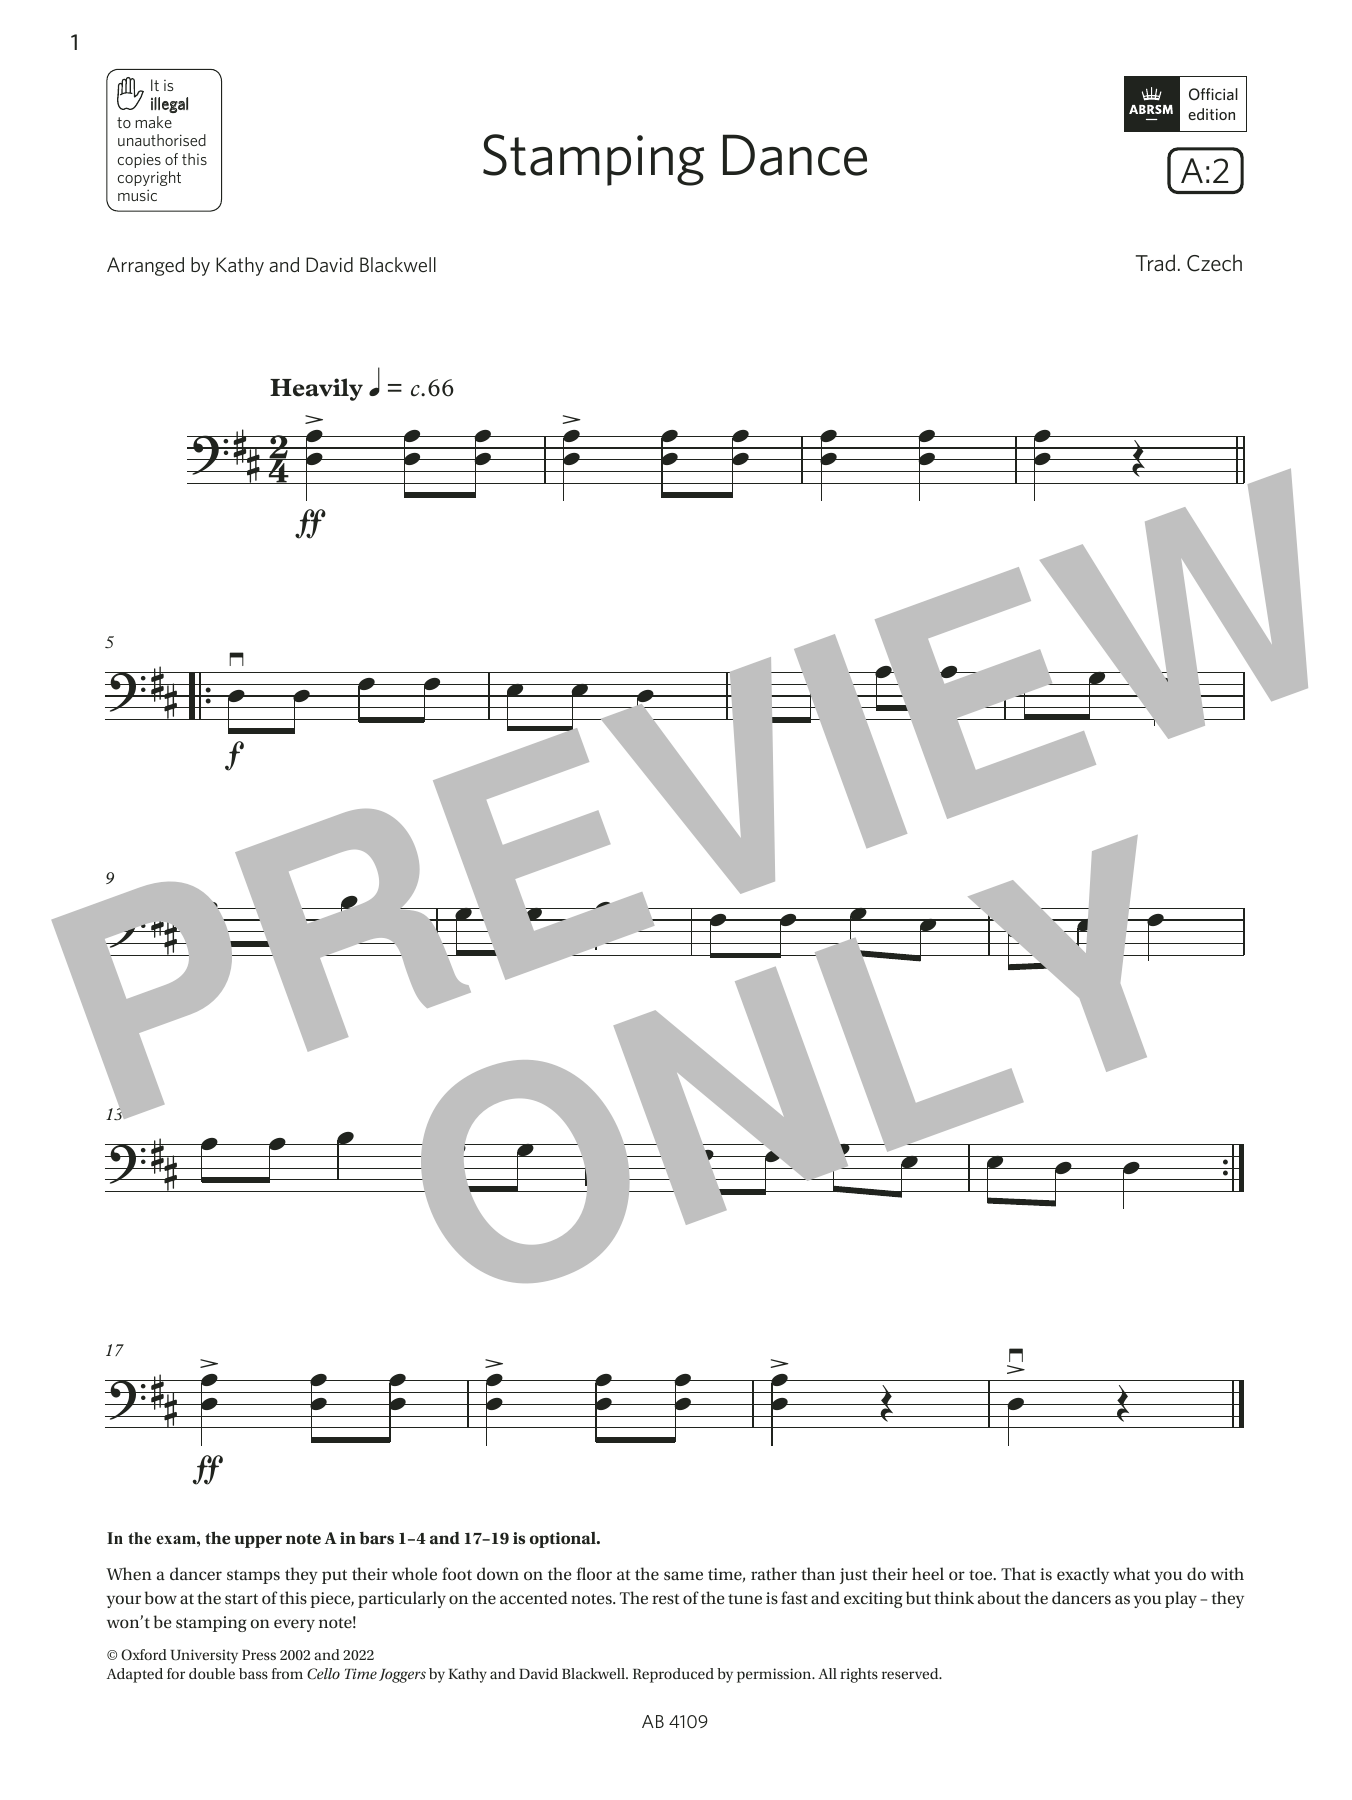 Download Trad. Czech Stamping Dance (Grade Initial, A2, from Sheet Music